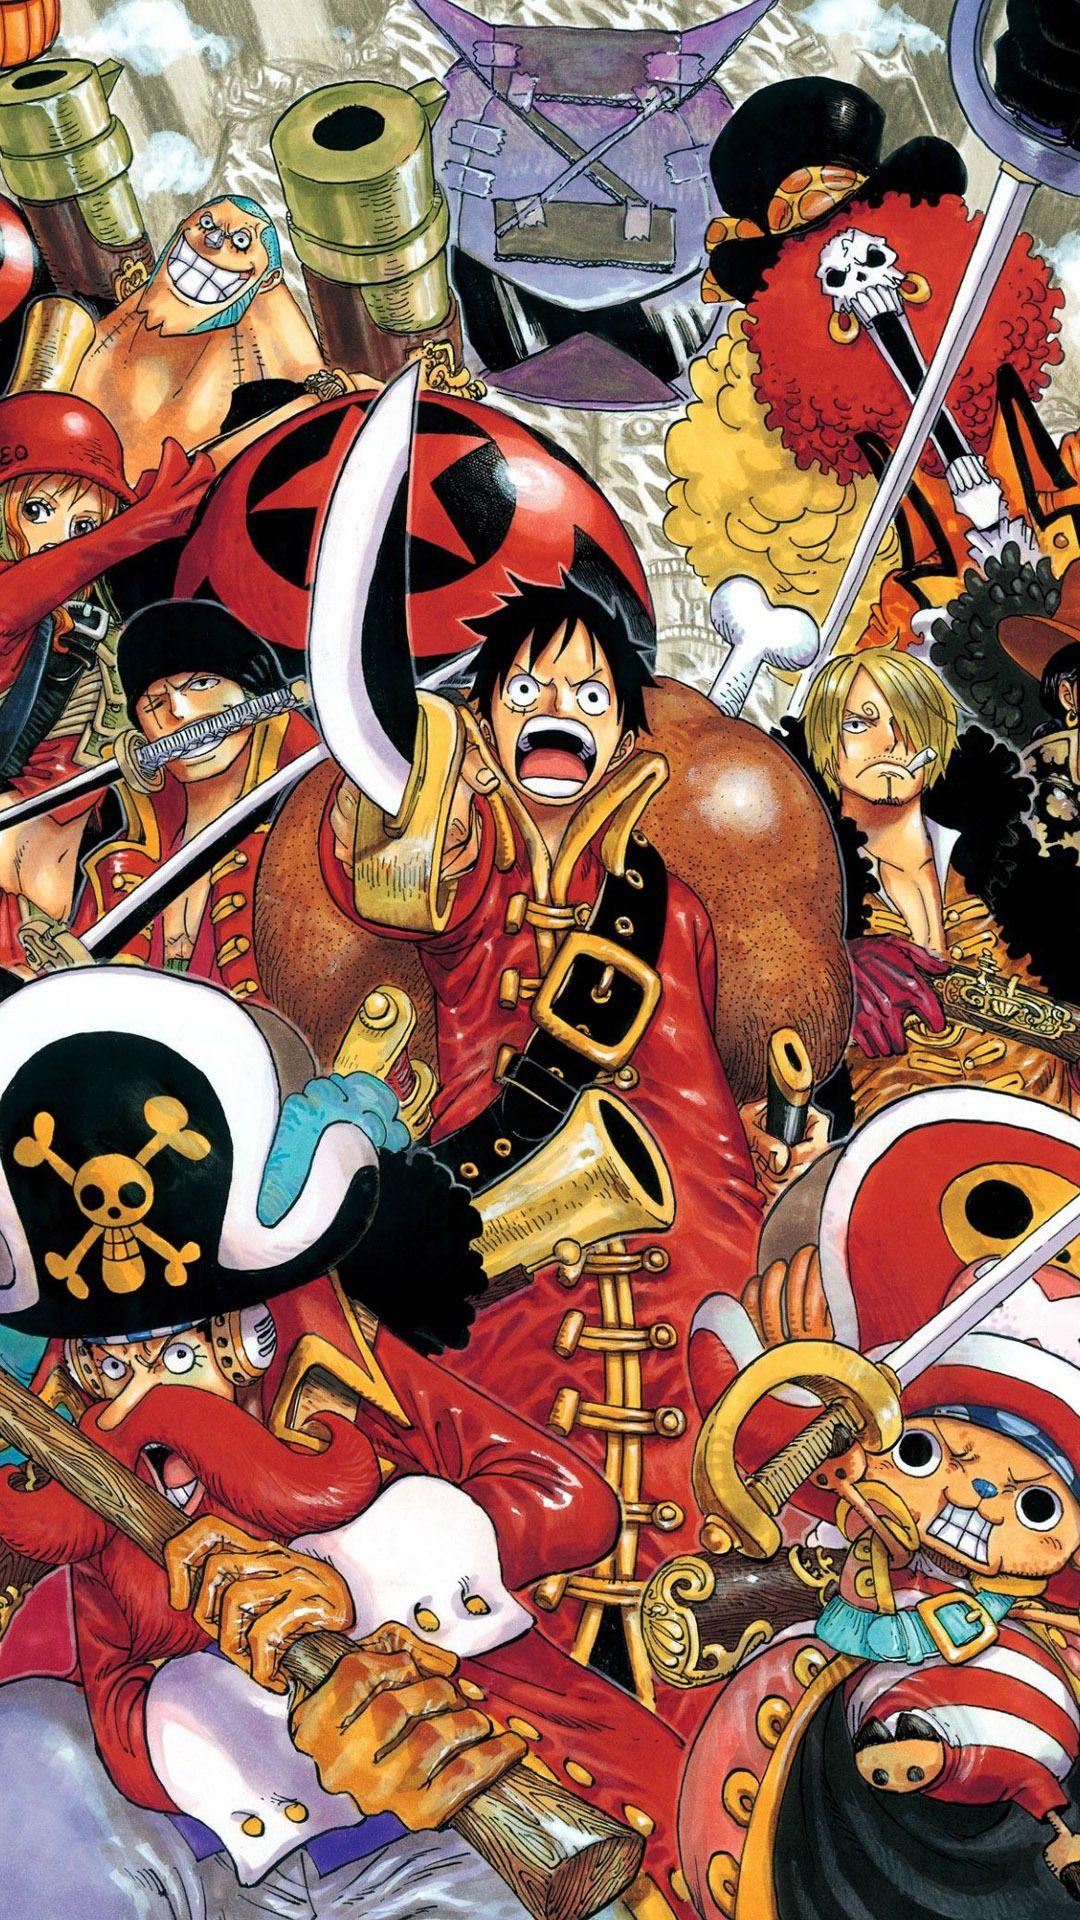 Best One Piece Wallpapers : 10 Top One Piece 1080P Wallpaper FULL HD ...